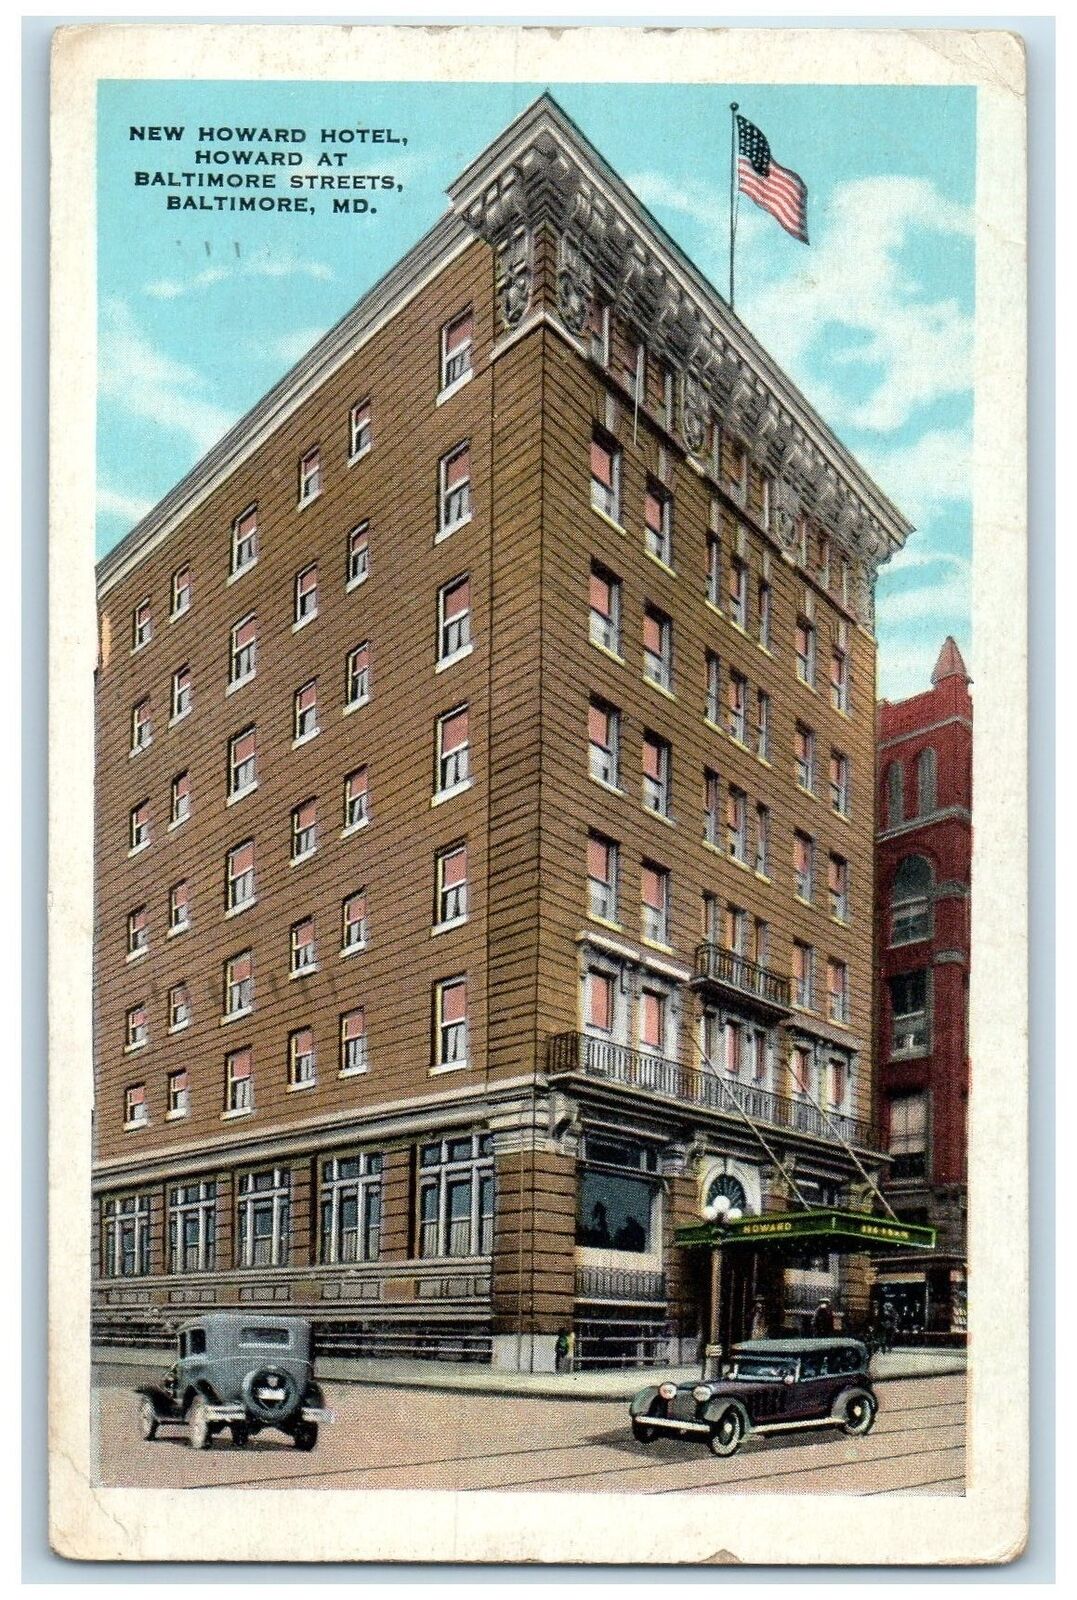 1939 New Howard Hotel View Baltimore Streets Baltimore Maryland MD Cars Postcard